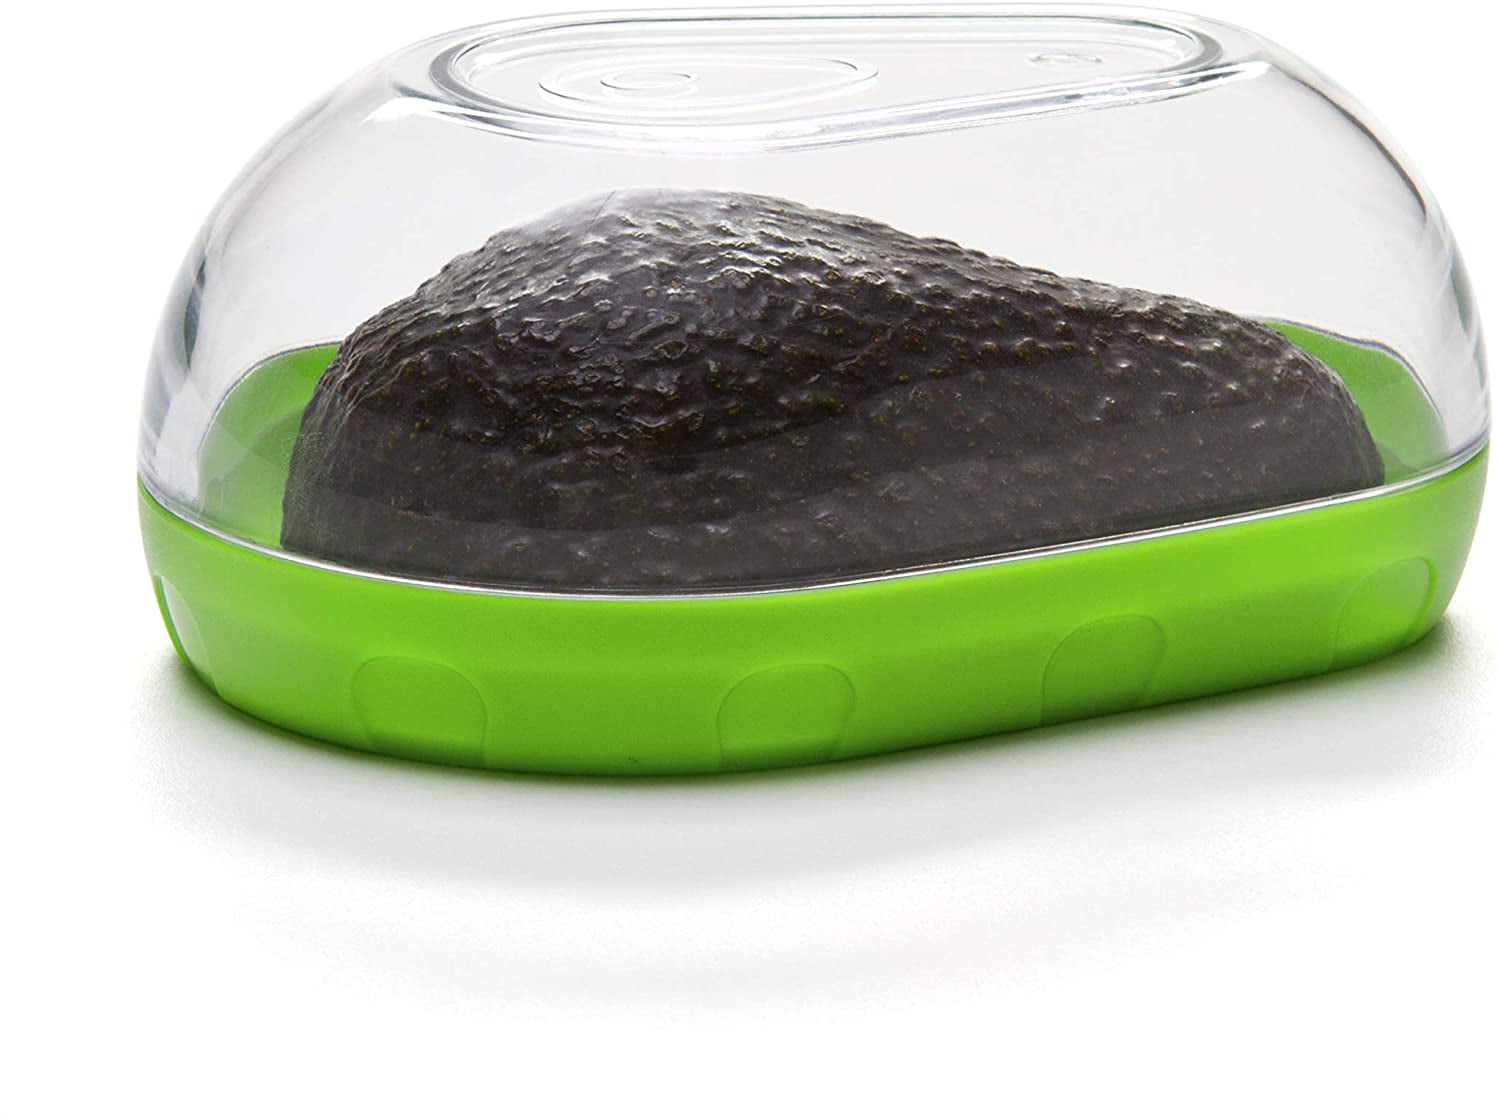 Prepworks by Progressive Avocado Keeper Prevent Your Avocados From Going Bad Avocado Storage Container Snap-On Lid Keep Your Avocados Fresh for Days 